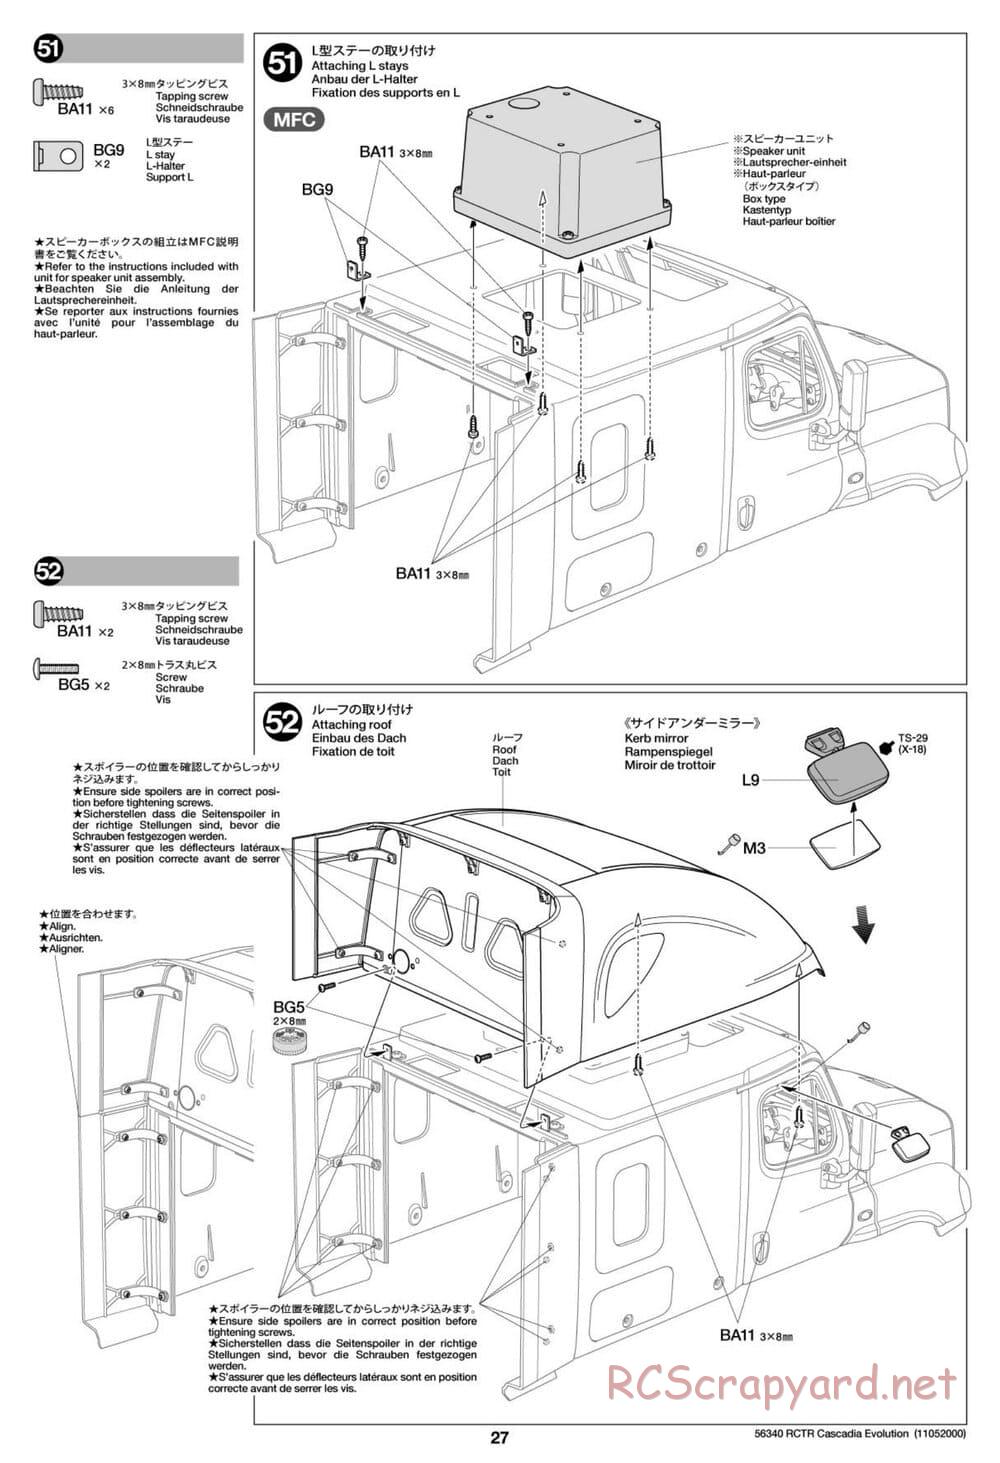 Tamiya - Freightliner Cascadia Evolution Tractor Truck Chassis - Manual - Page 27